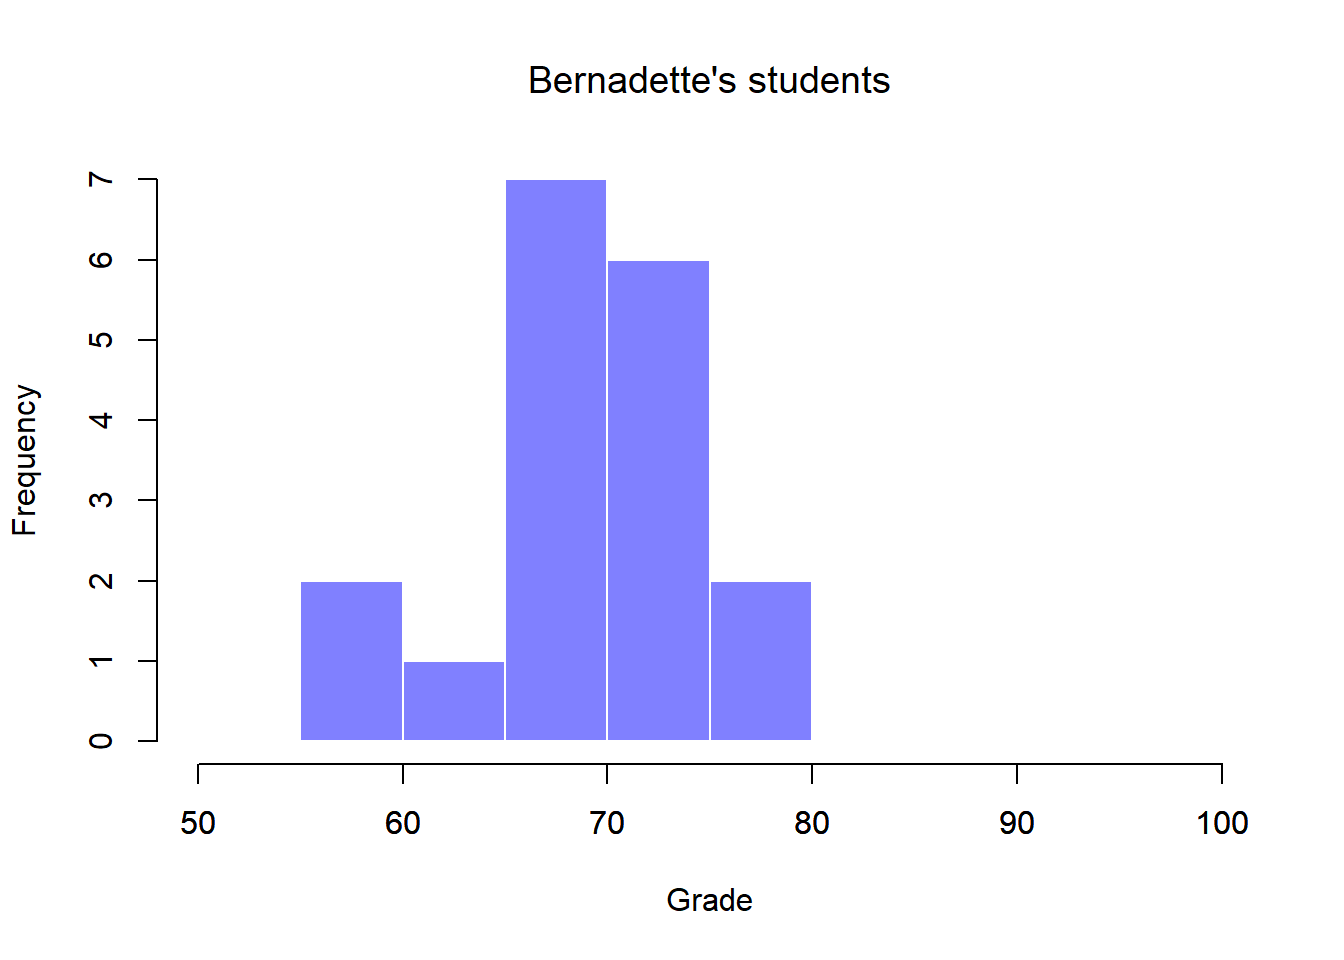 Histogram showing the overall distribution of grades for students in Bernadette's class